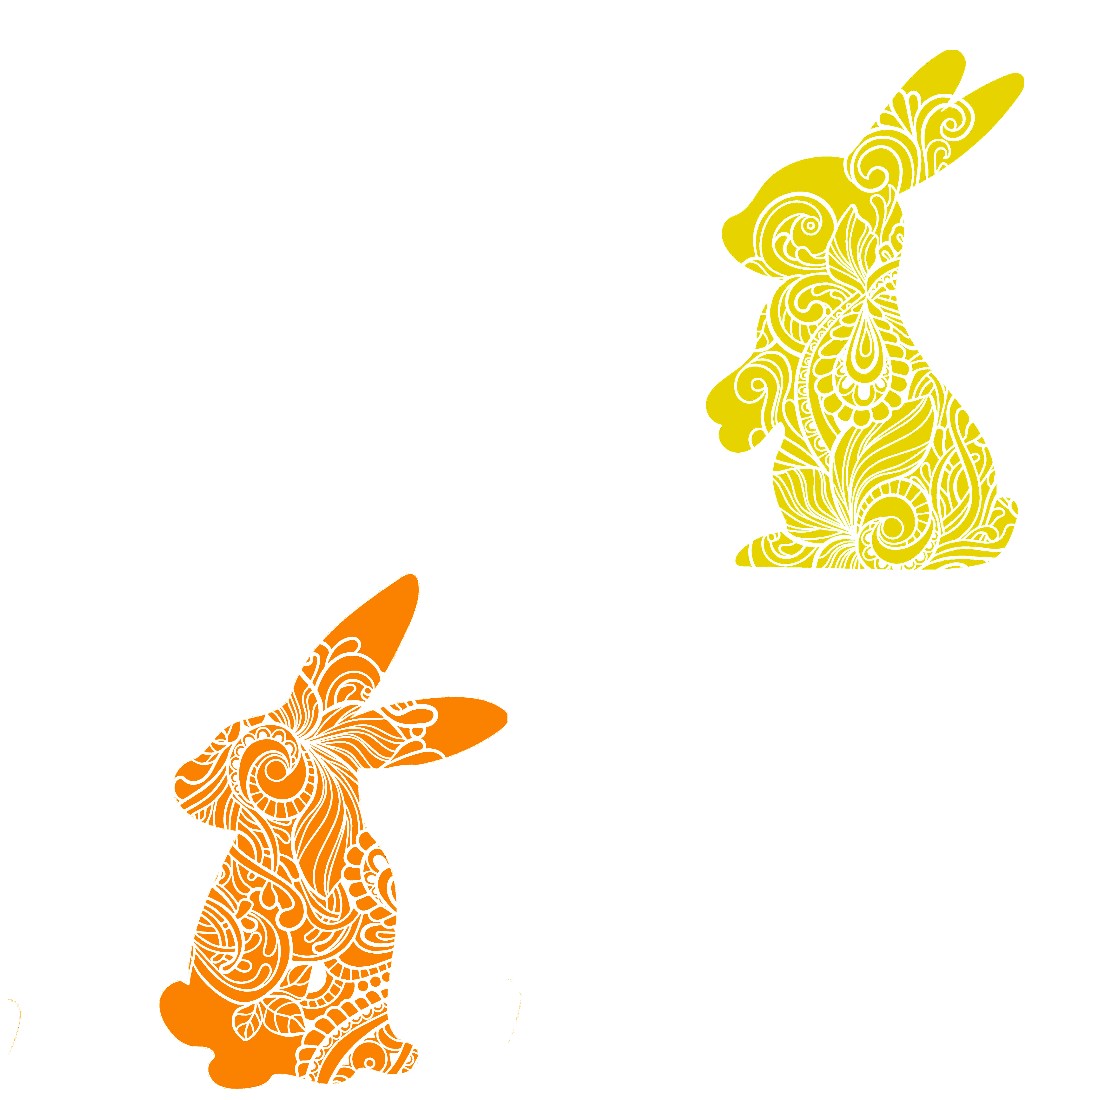 Decorative Bunny Set of 6 Stickers Muliti Colored Colorful Rabbit Animal SVG Files preview image.